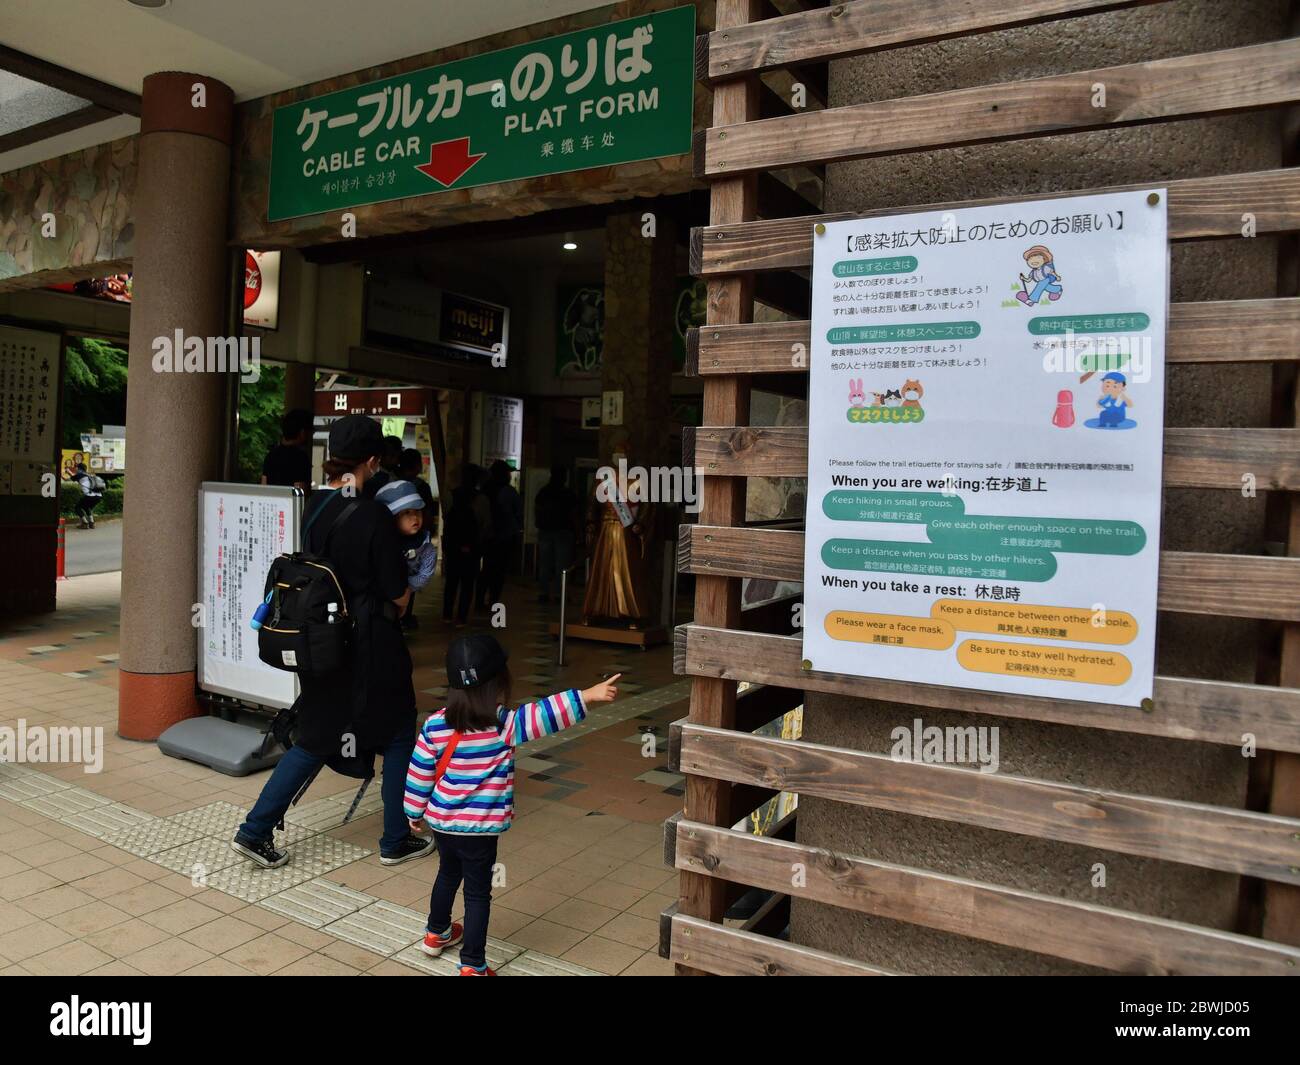 Sunday. 31st May, 2020. A notice displays at the Kiyotaki station in Hachioji, Tokyo, Japan on Sunday, May 31, 2020. Credit: AFLO/Alamy Live News Stock Photo